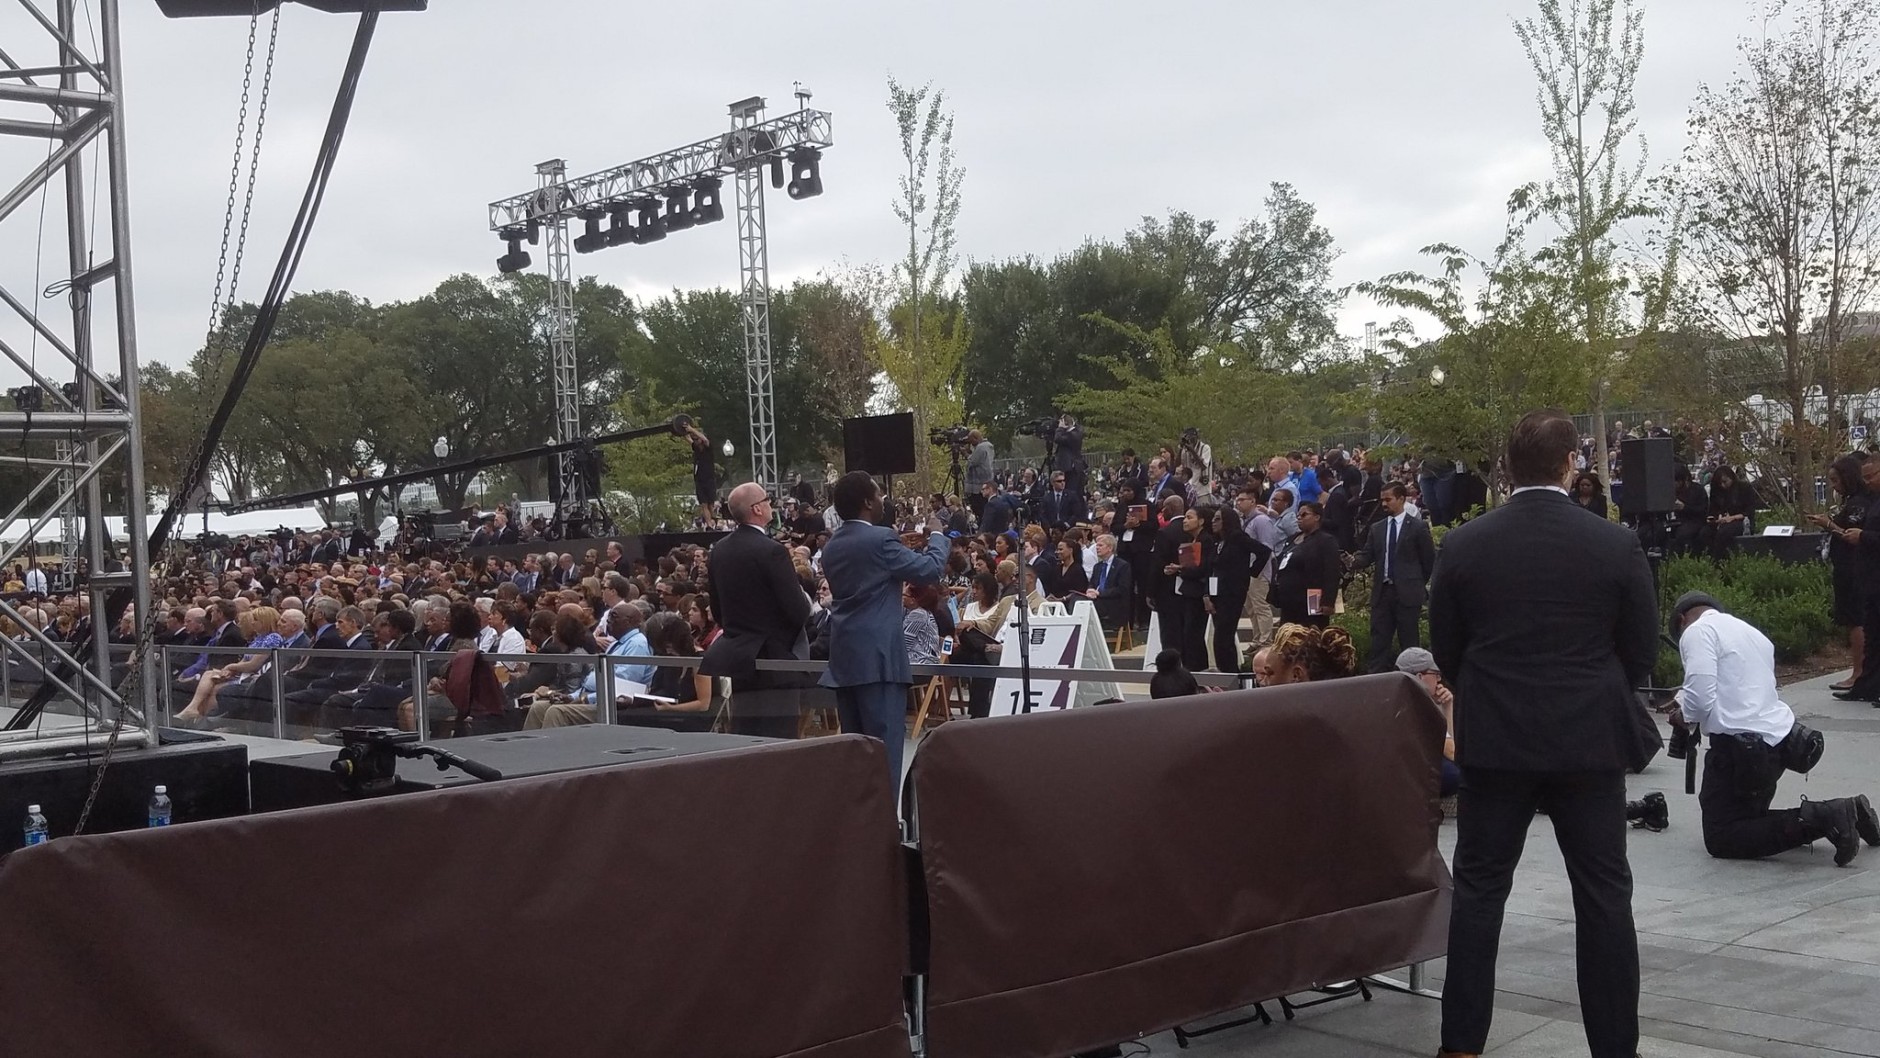 The crowd watches as speakers take the stage at the opening dedication of the National Museum of African American History on Sept. 24, 2016. (WTOP/Allison Keyes)